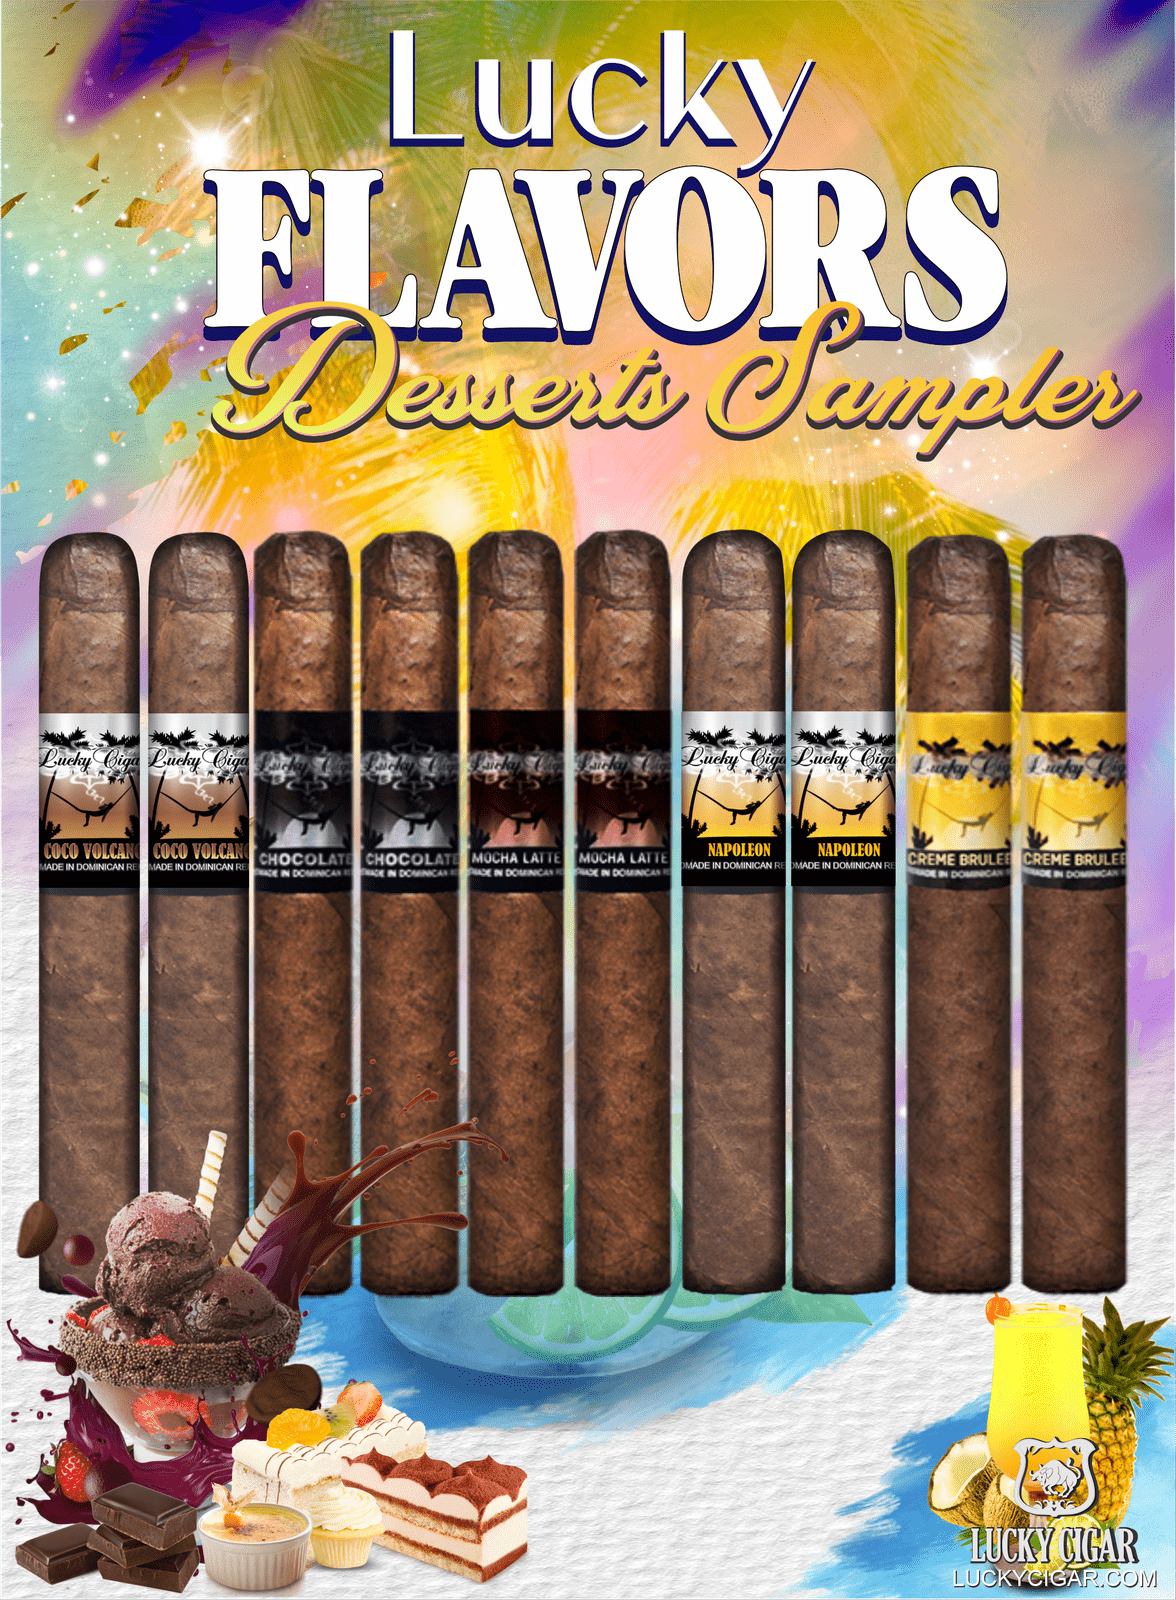 Flavored Cigars: Lucky Flavors 10 Piece Desserts Sampler 